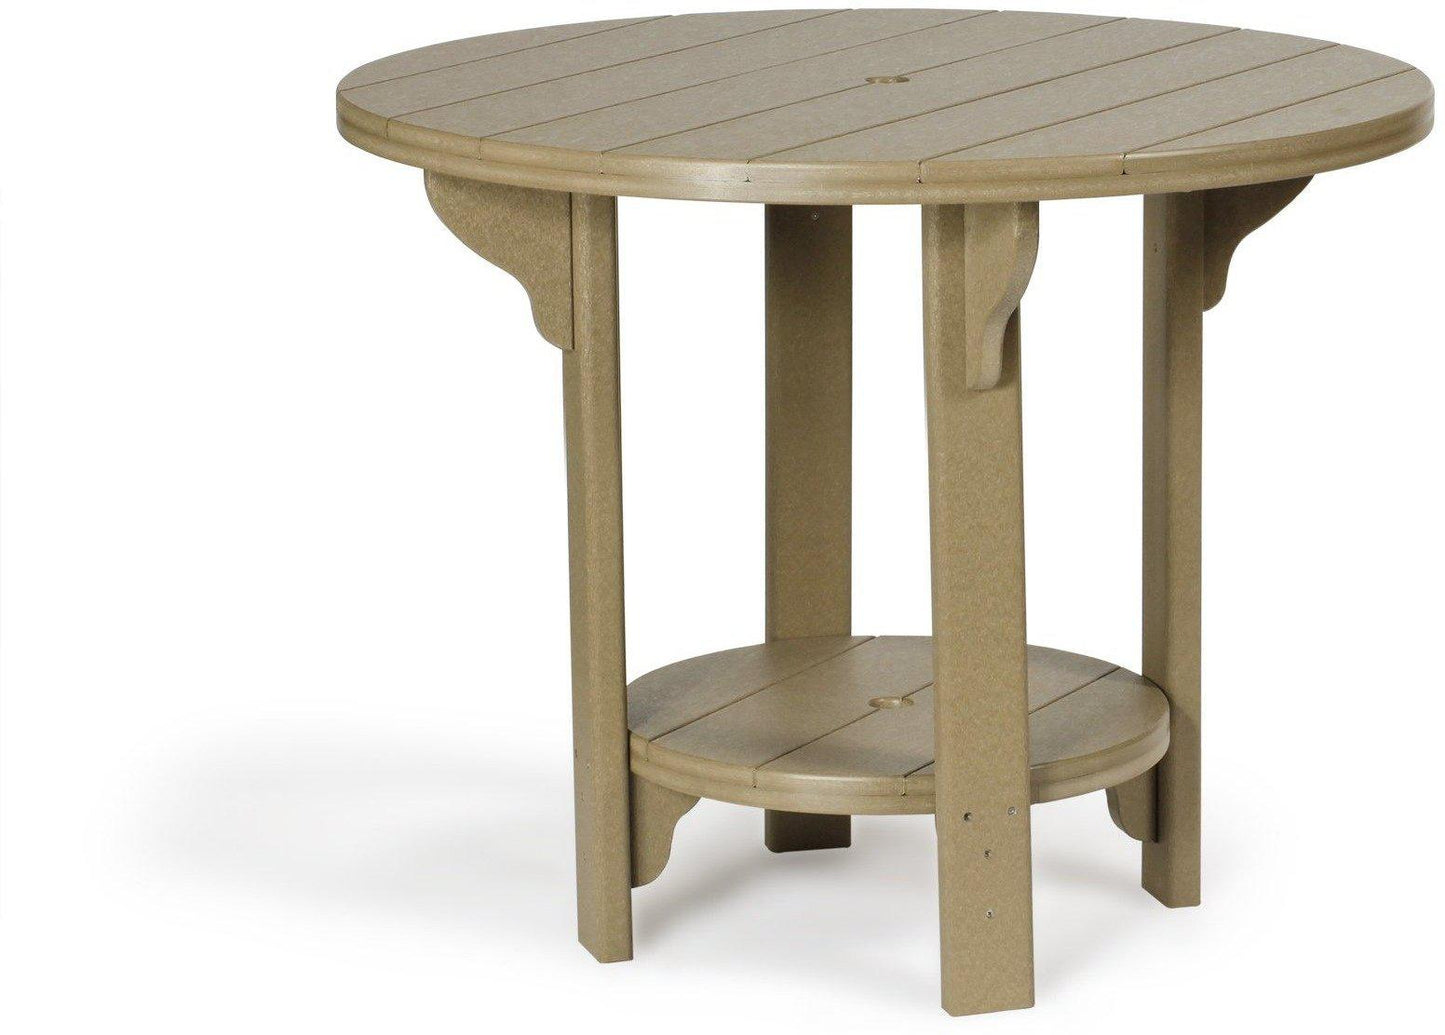 Leisure Lawns Amish Made Recycled Plastic 42" Round Table (Dining Height) Model #742D - LEAD TIME TO SHIP 4 WEEKS OR LESS